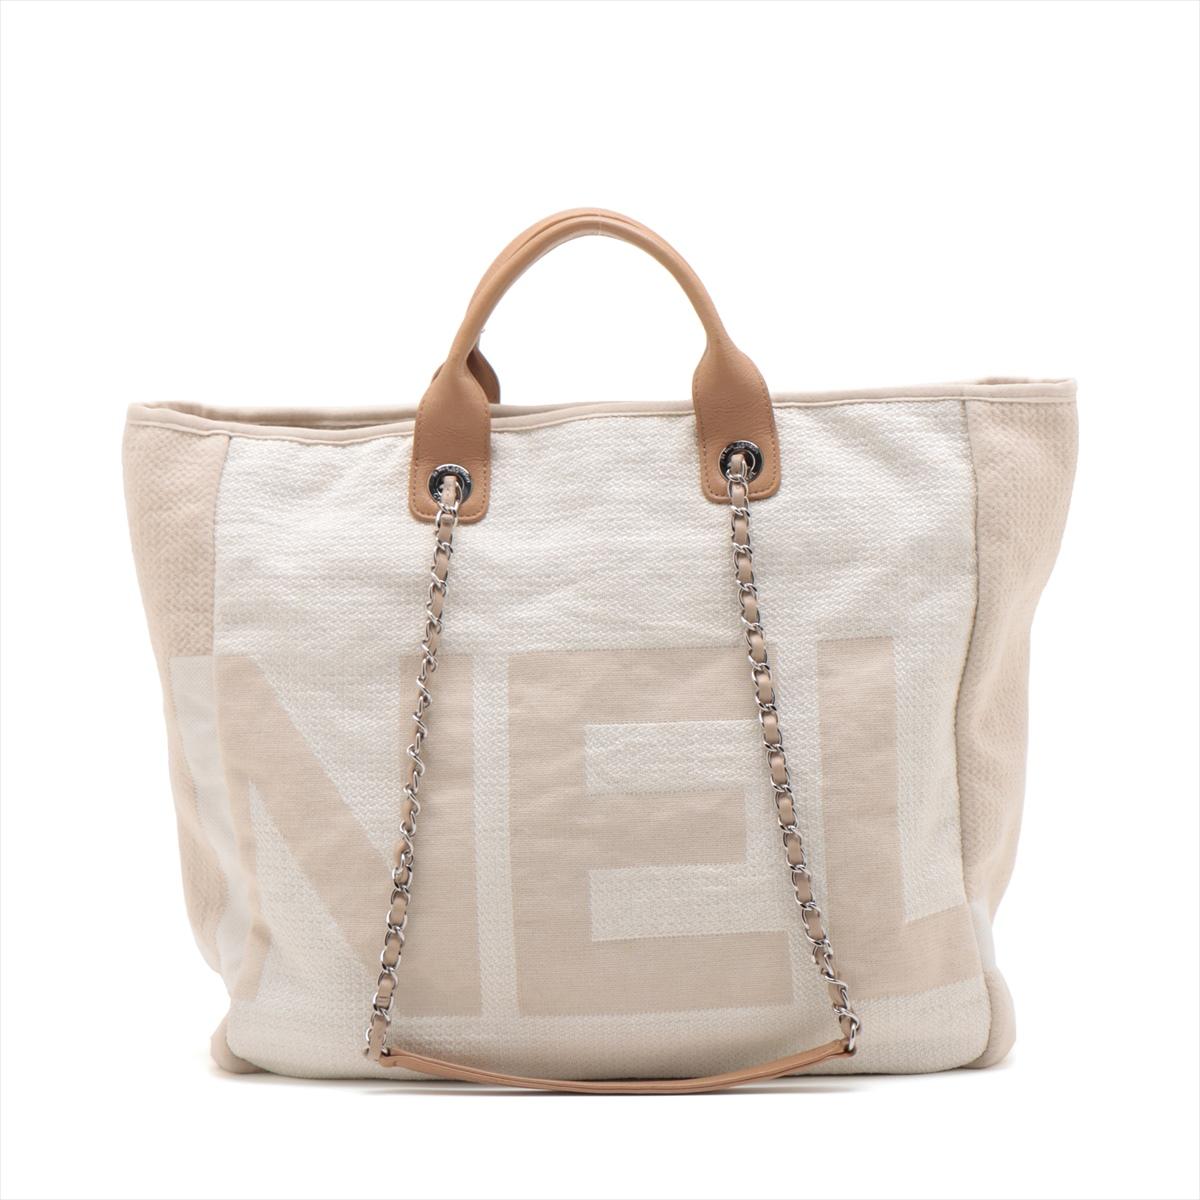 Chanel Canvas Deauville Tote Bag Light Beige In Good Condition For Sale In Indianapolis, IN